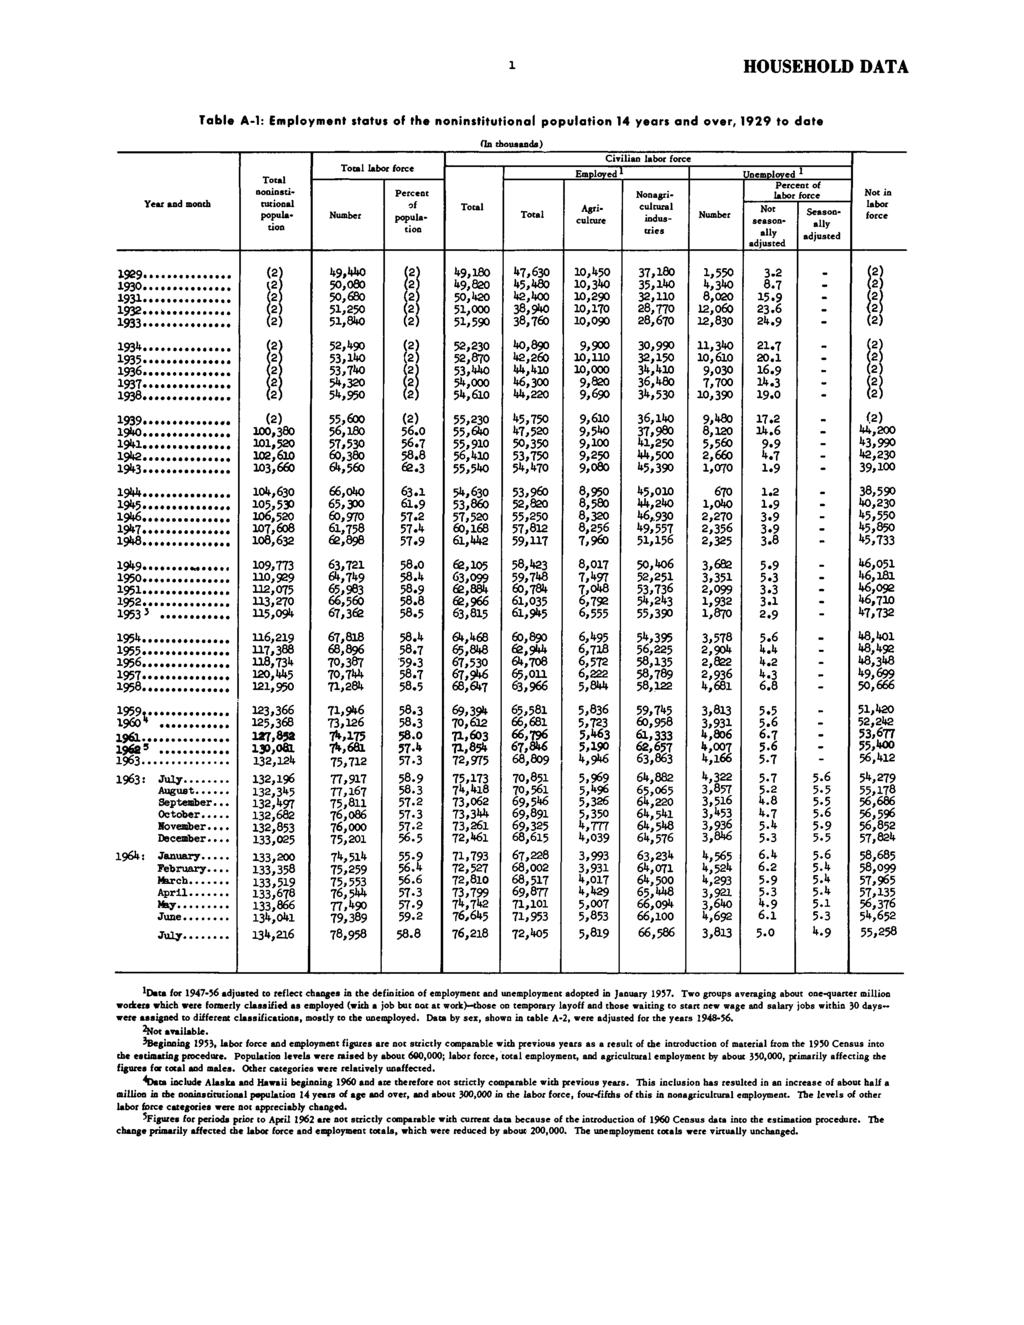 HOUSEHOLD DATA Table A-l: Employment status of the noninstitutional population 14 years and over, 1929 to date Year and month noninstitutional popula- labor force Number fin thousands) Employed *